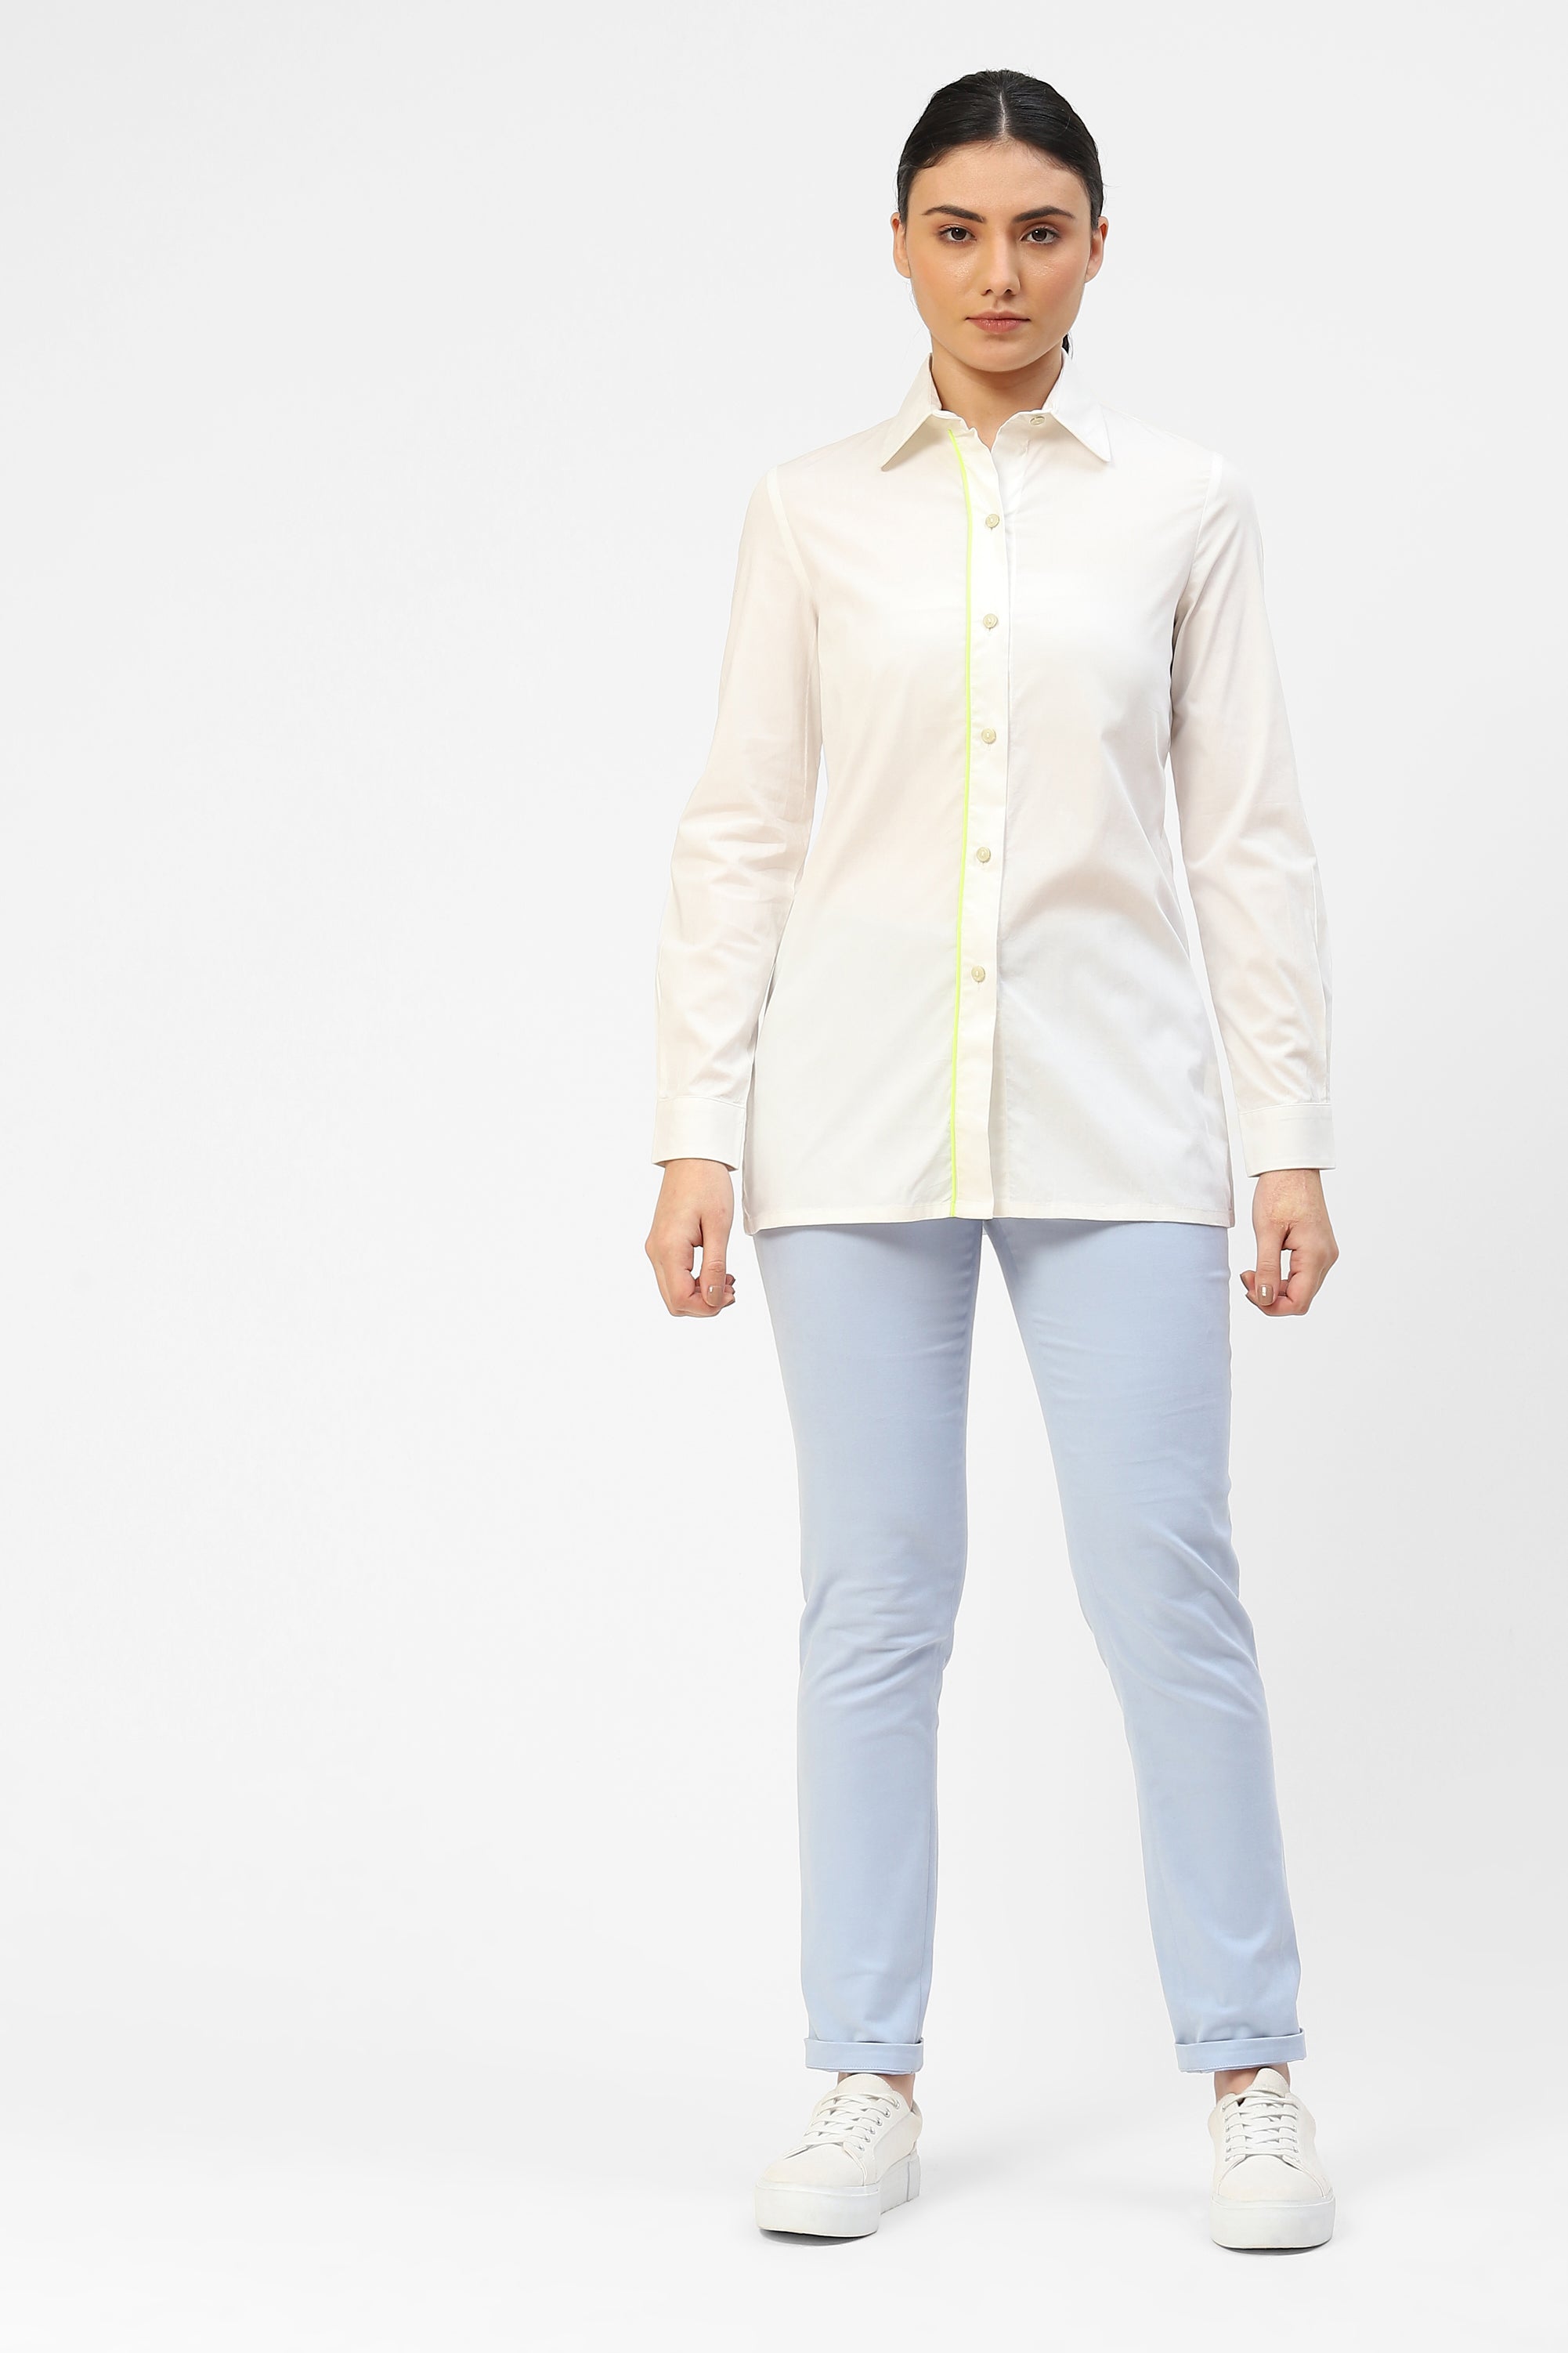 Womens Classic White Shirt with Lime Green Placket Piping